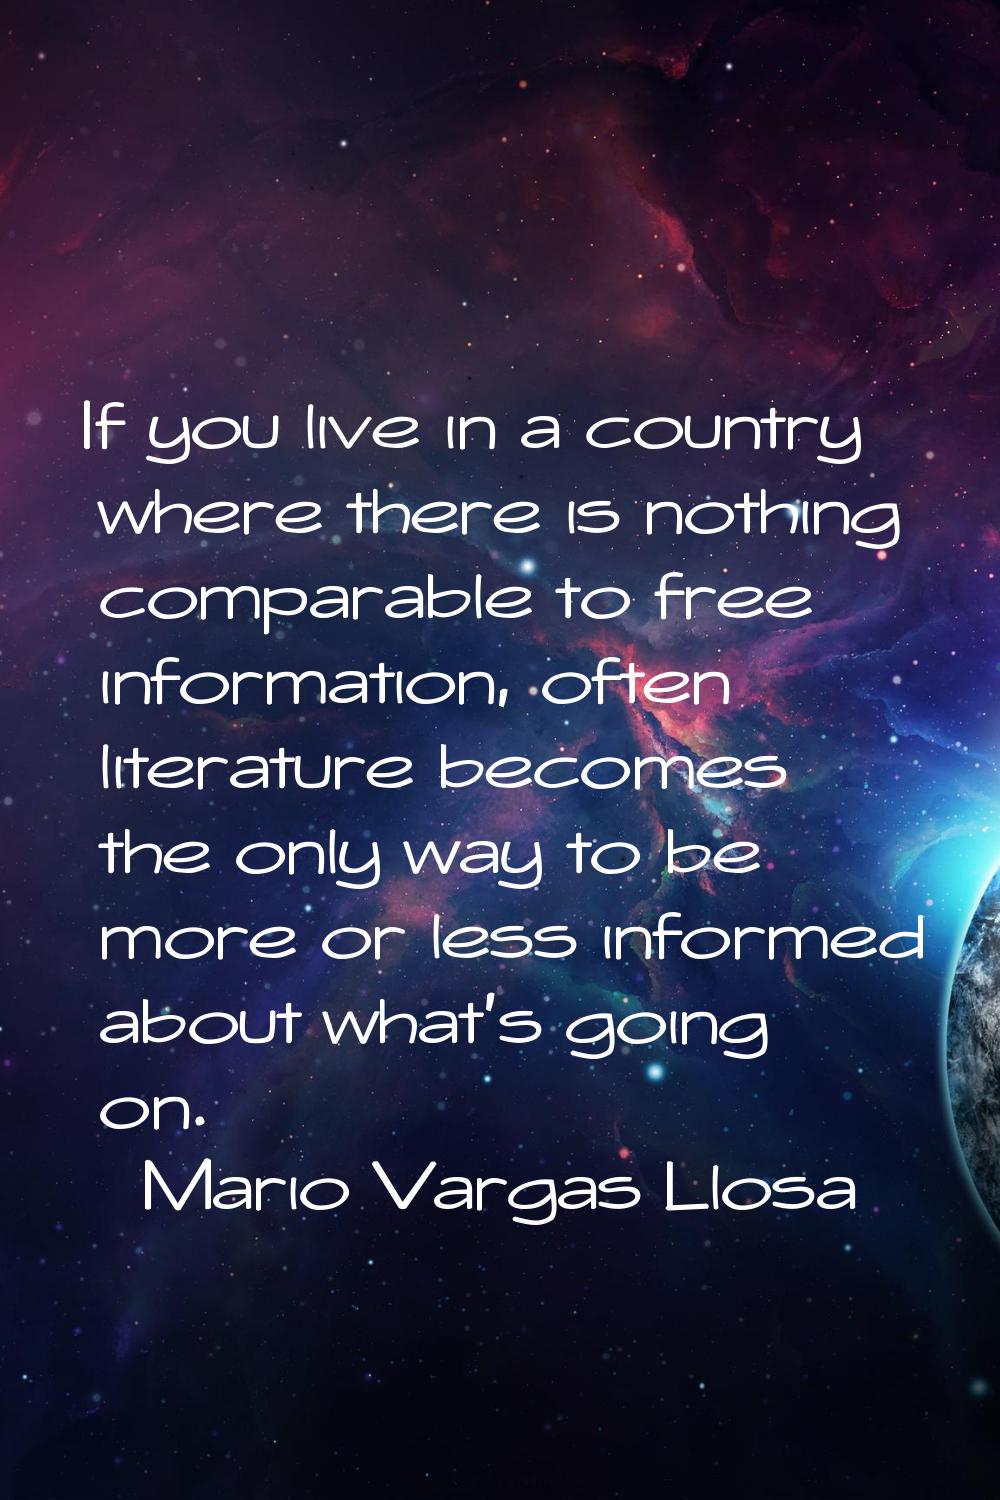 If you live in a country where there is nothing comparable to free information, often literature be